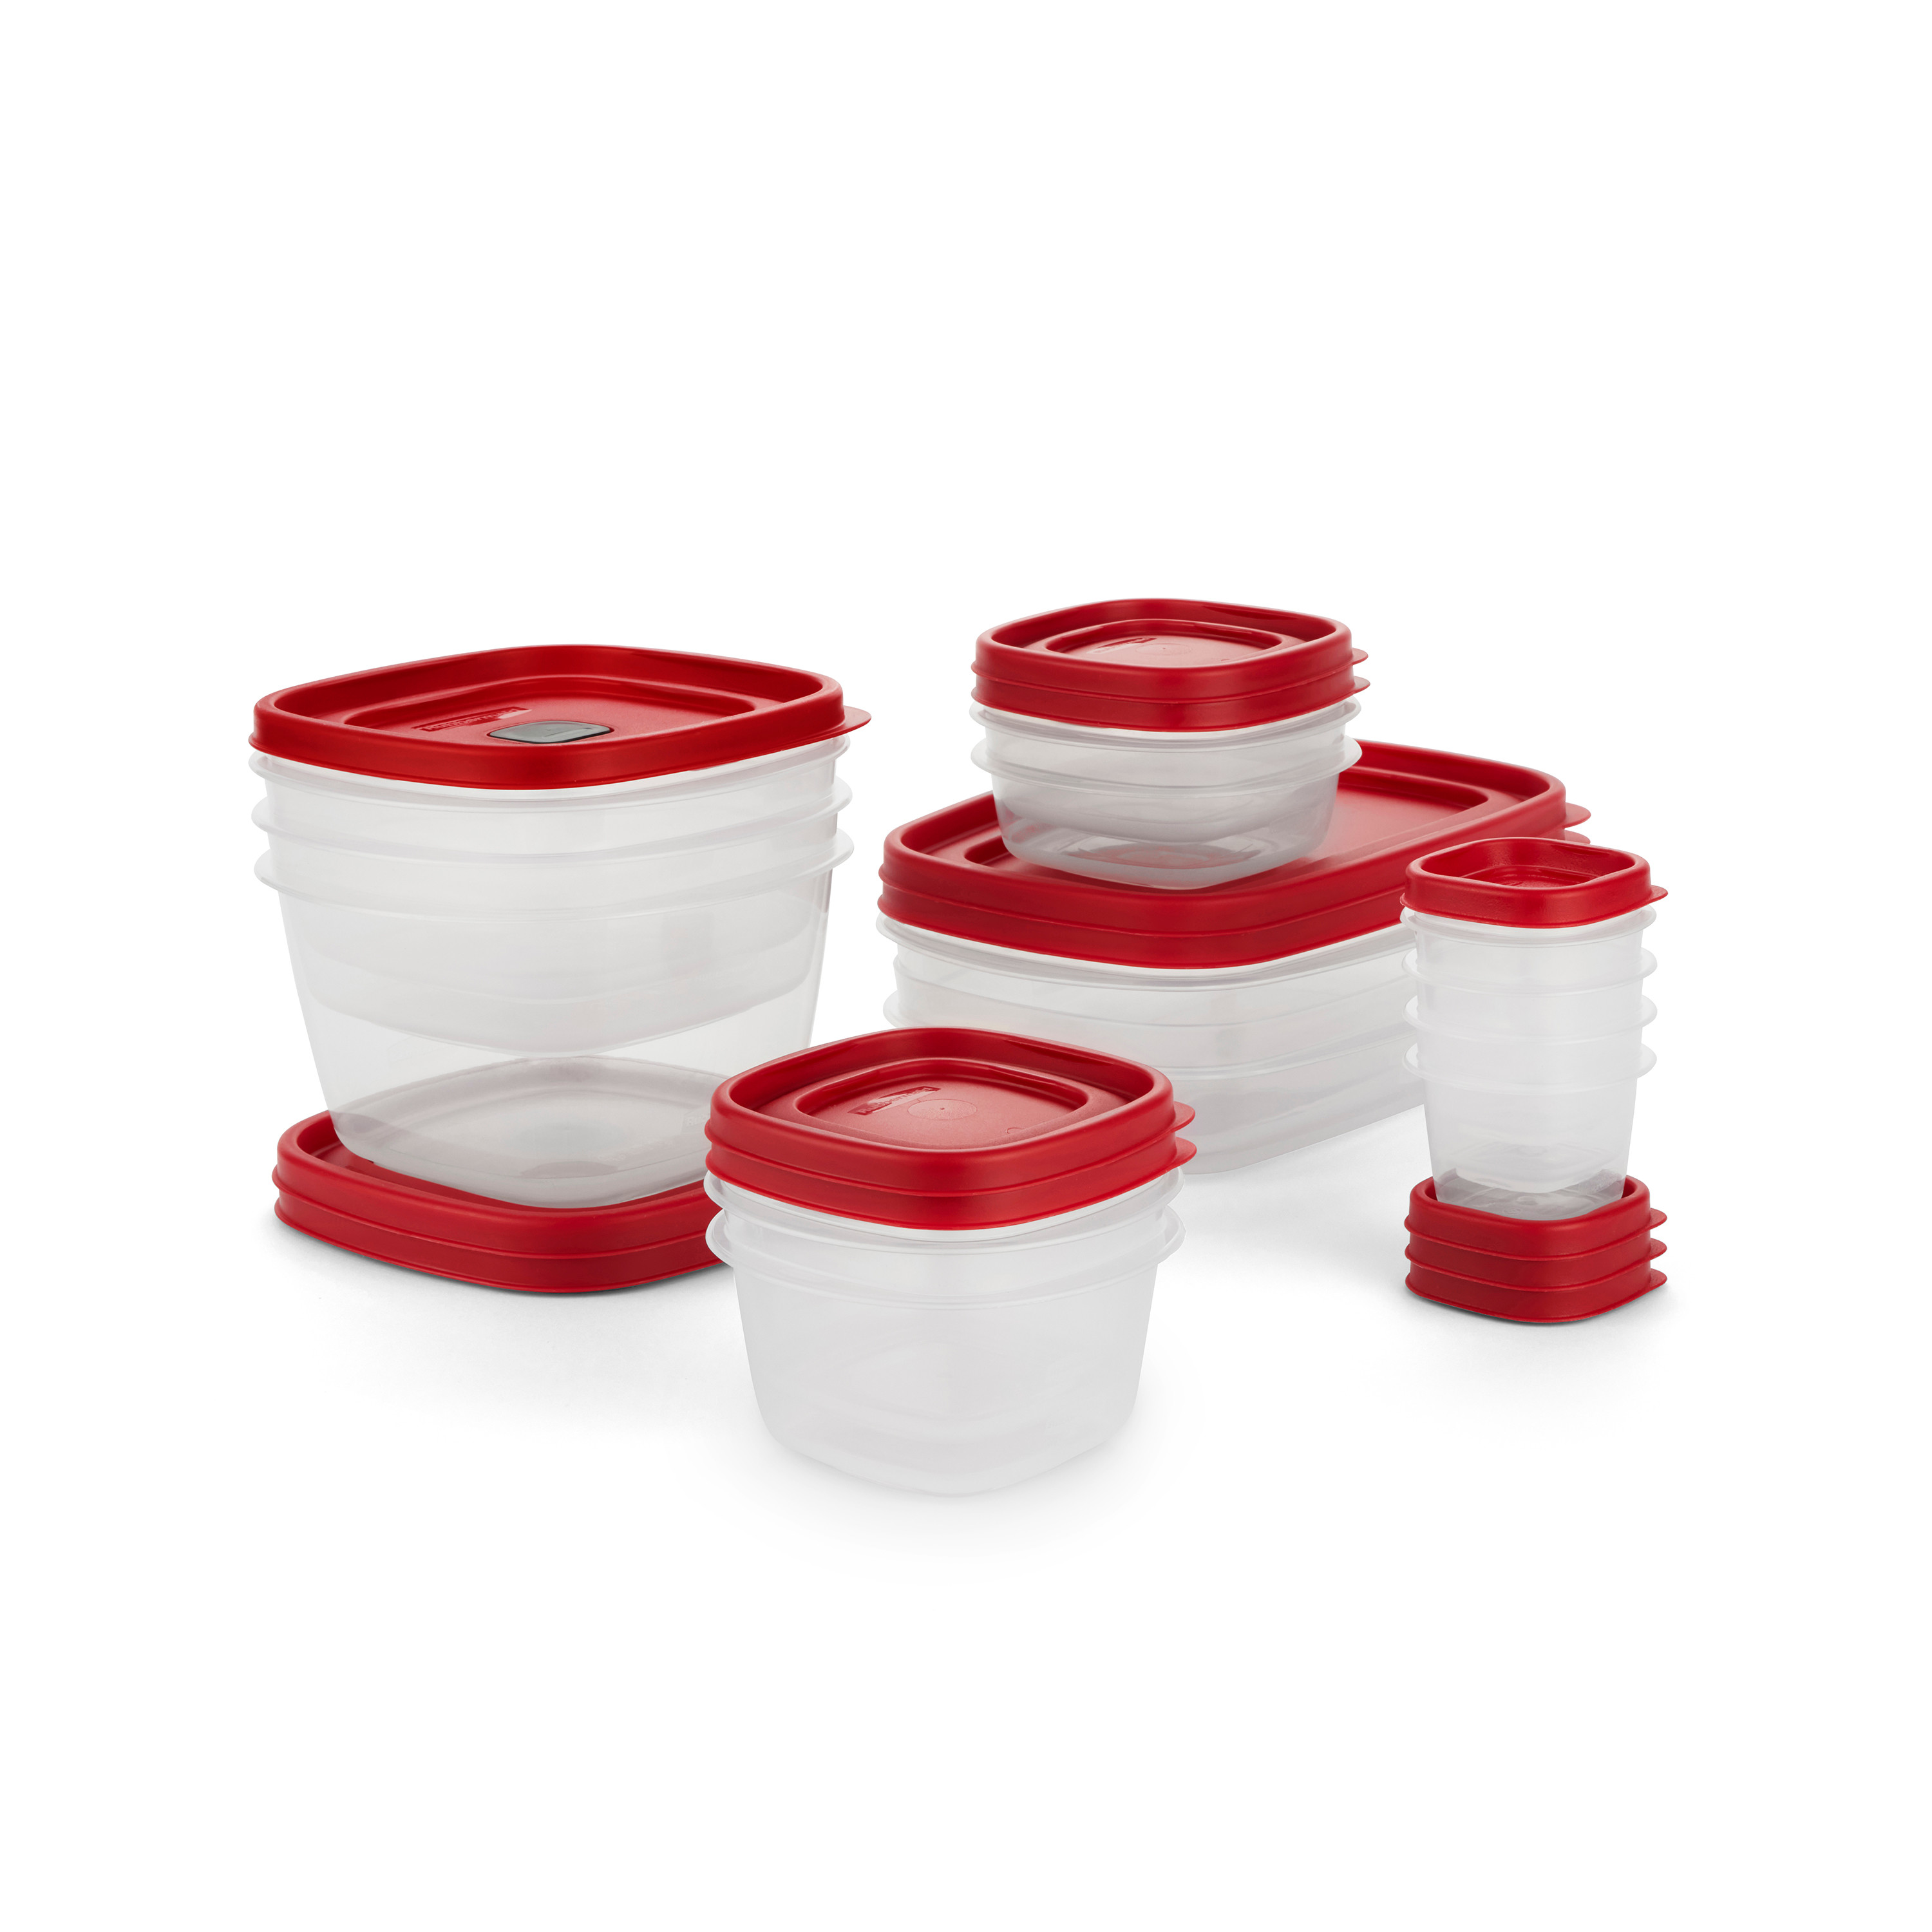 Rubbermaid EasyFindLids 26 Piece Plastic Food Storage Container Set with Vents, (39.5 Cup), Racer Red - image 3 of 9